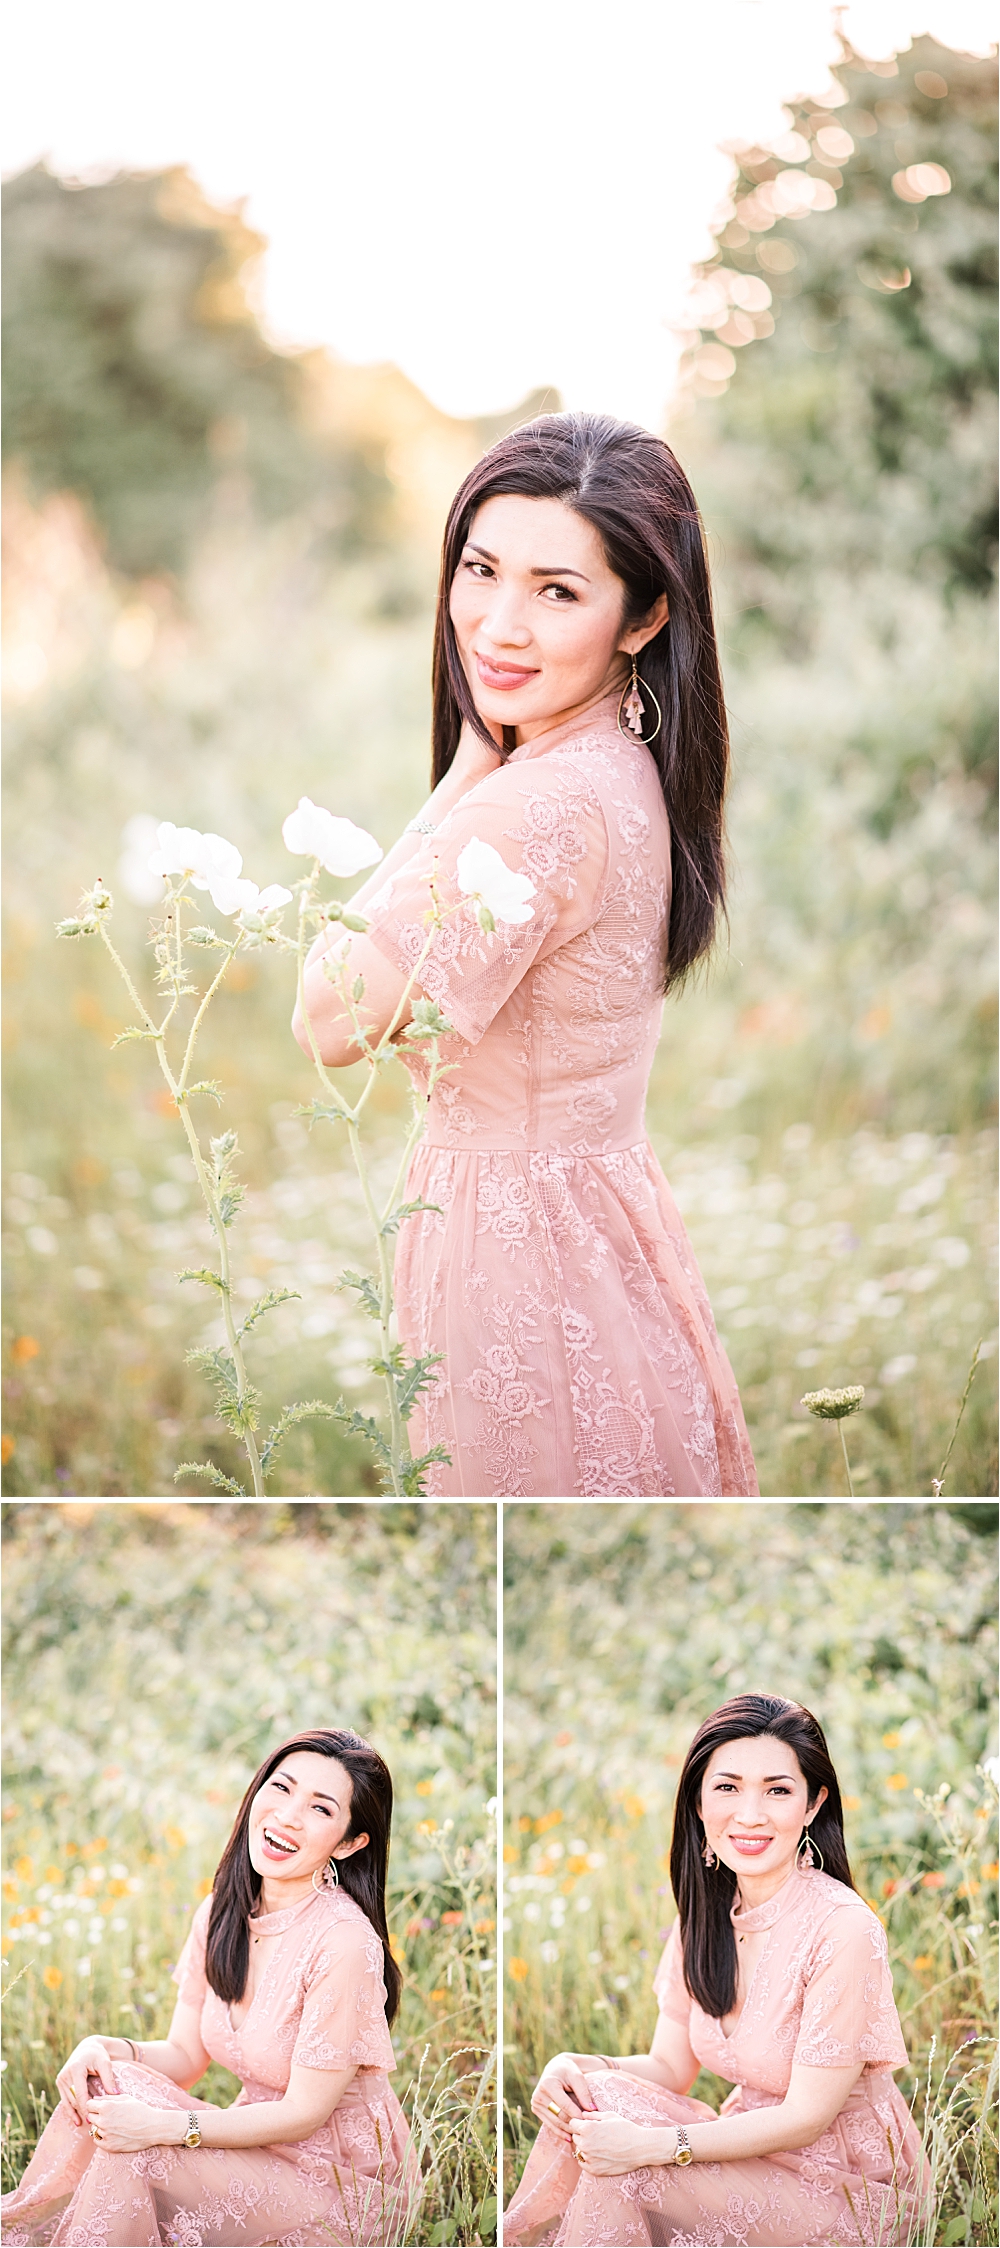 Portraits of mom, with wildflowers and pink lace dress